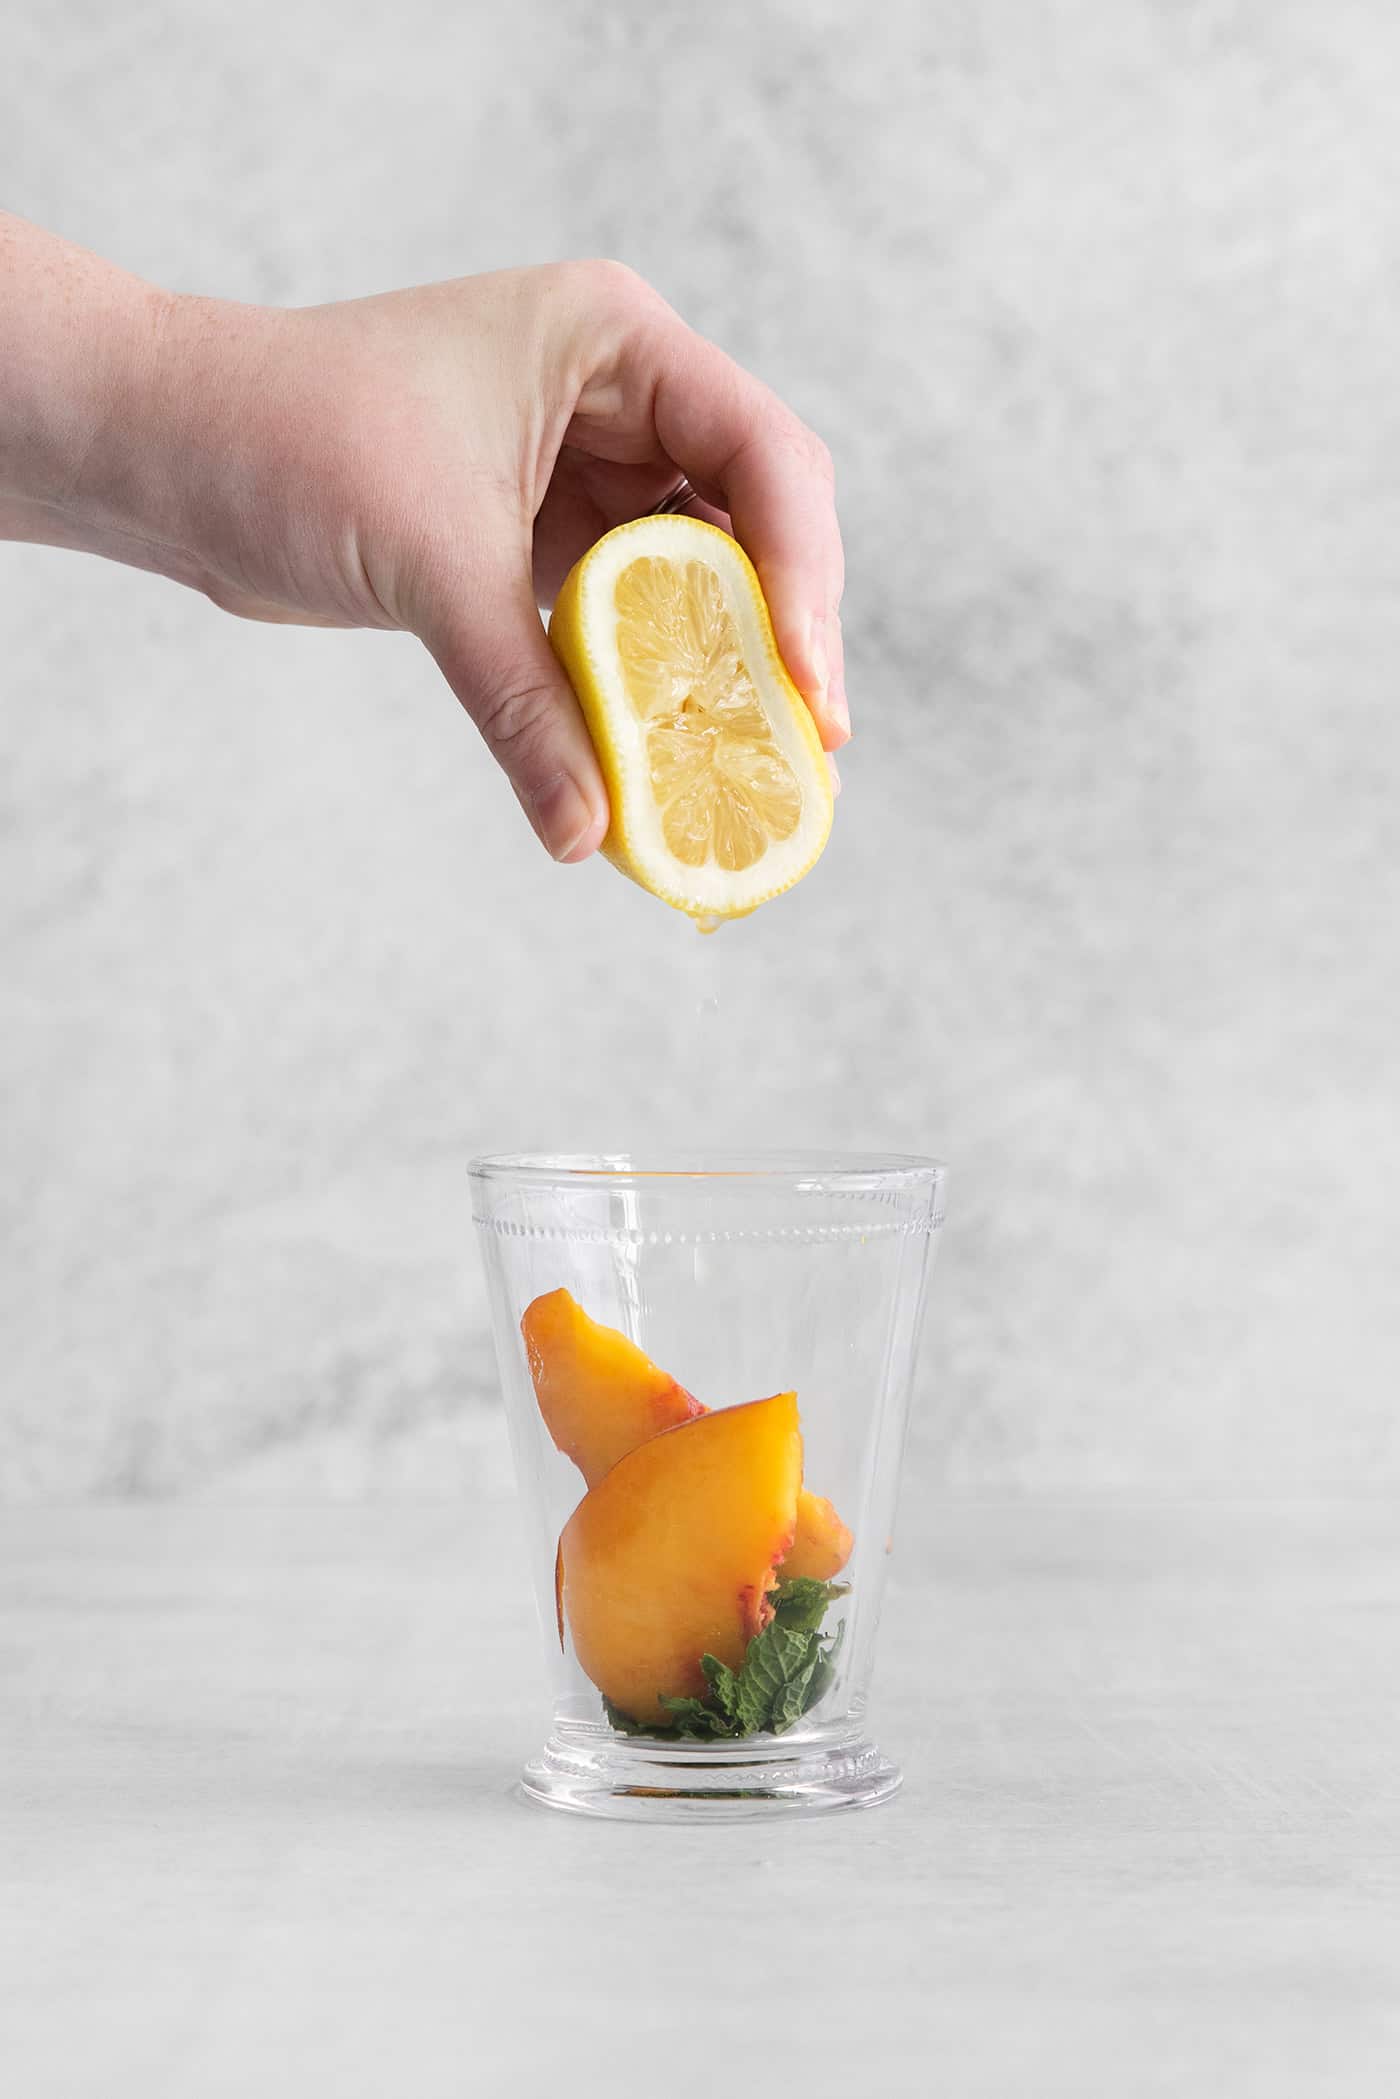 Lemon juice being squeezed into a cocktail glass with peach and mint